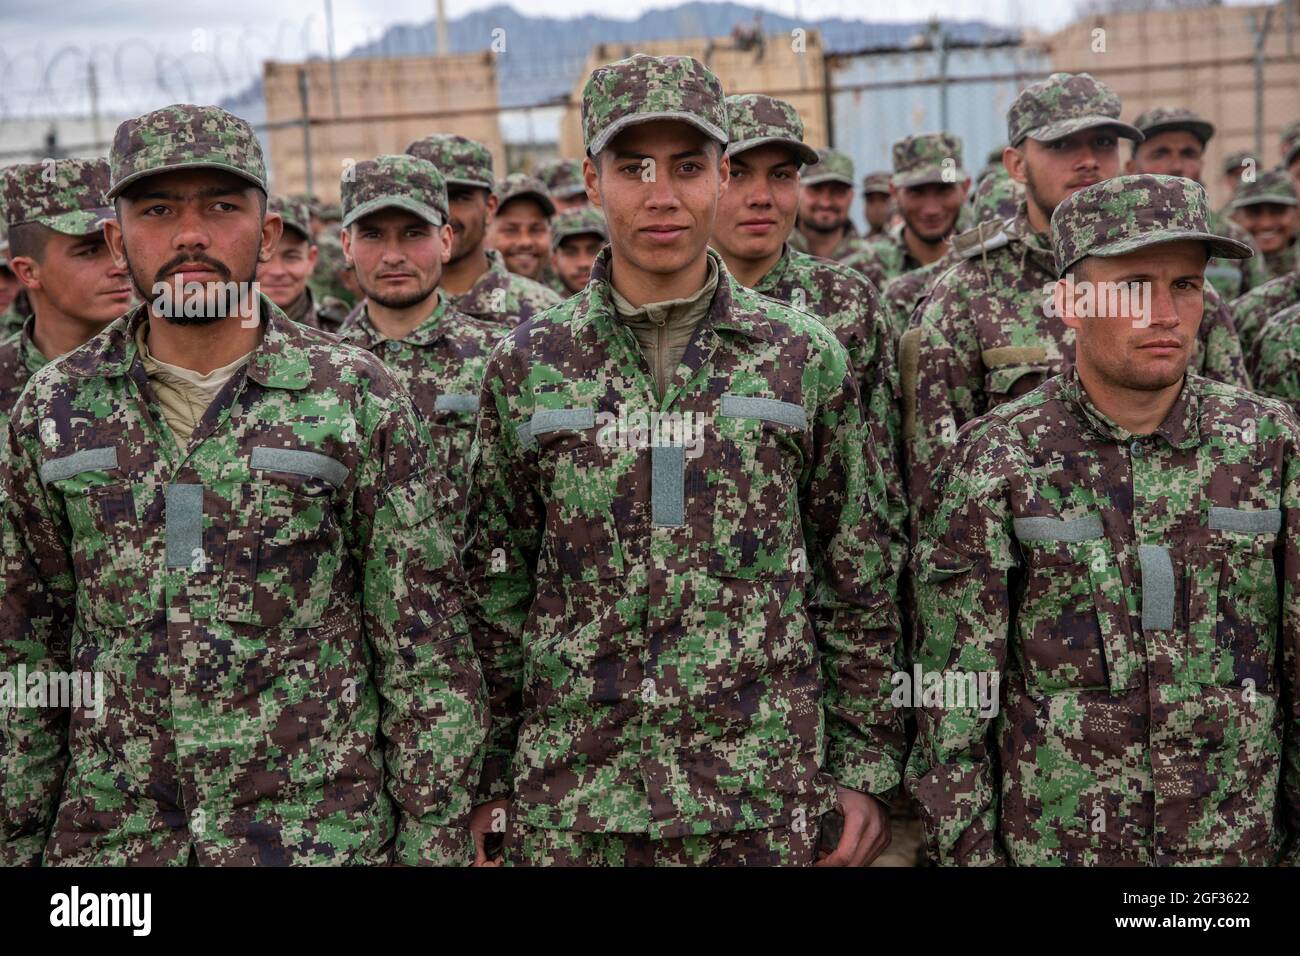 Afghan National Army trainees stand in formation during a visit by Afghan Deputy Defense Minister Dr. Yasin Zia and Resolute Support Commander Gen. Scott Miller in Kabul, Afghanistan, March 5, 2020. Resolute Support is a NATO-led (North Atlantic Treaty Organization) mission to train, advise, and assist the Afghan National Defense and Security Forces and institutions. (U.S. Army Reserve photo by Spc. Jeffery J. Harris/Released) Stock Photo